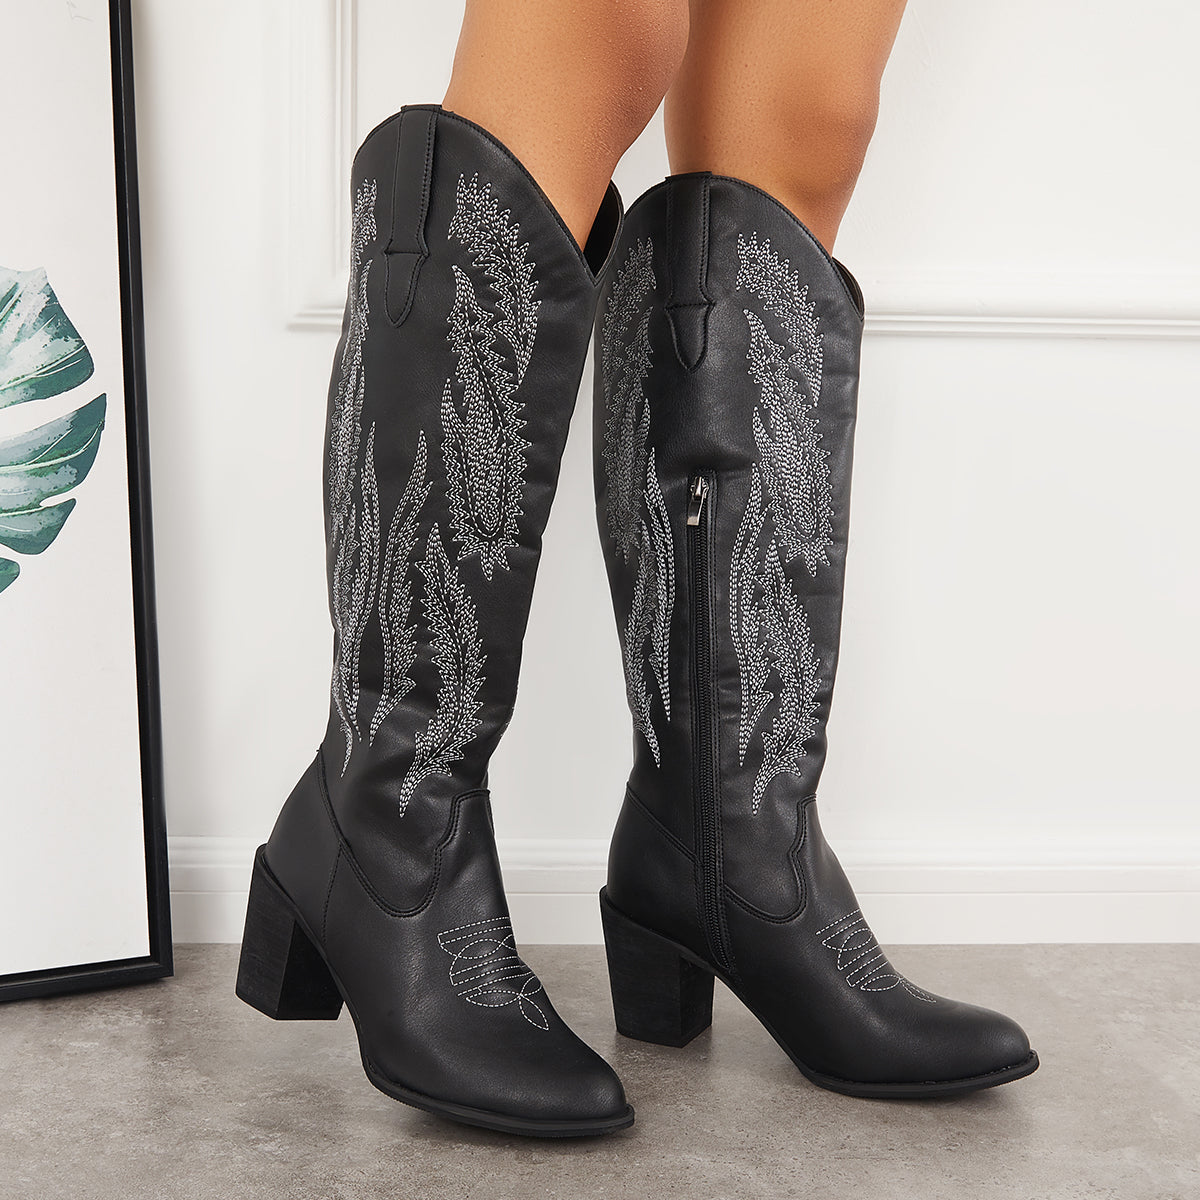 Embroidered Western Cowboy Boots Chunky Heel Knee High Riding Boots ...